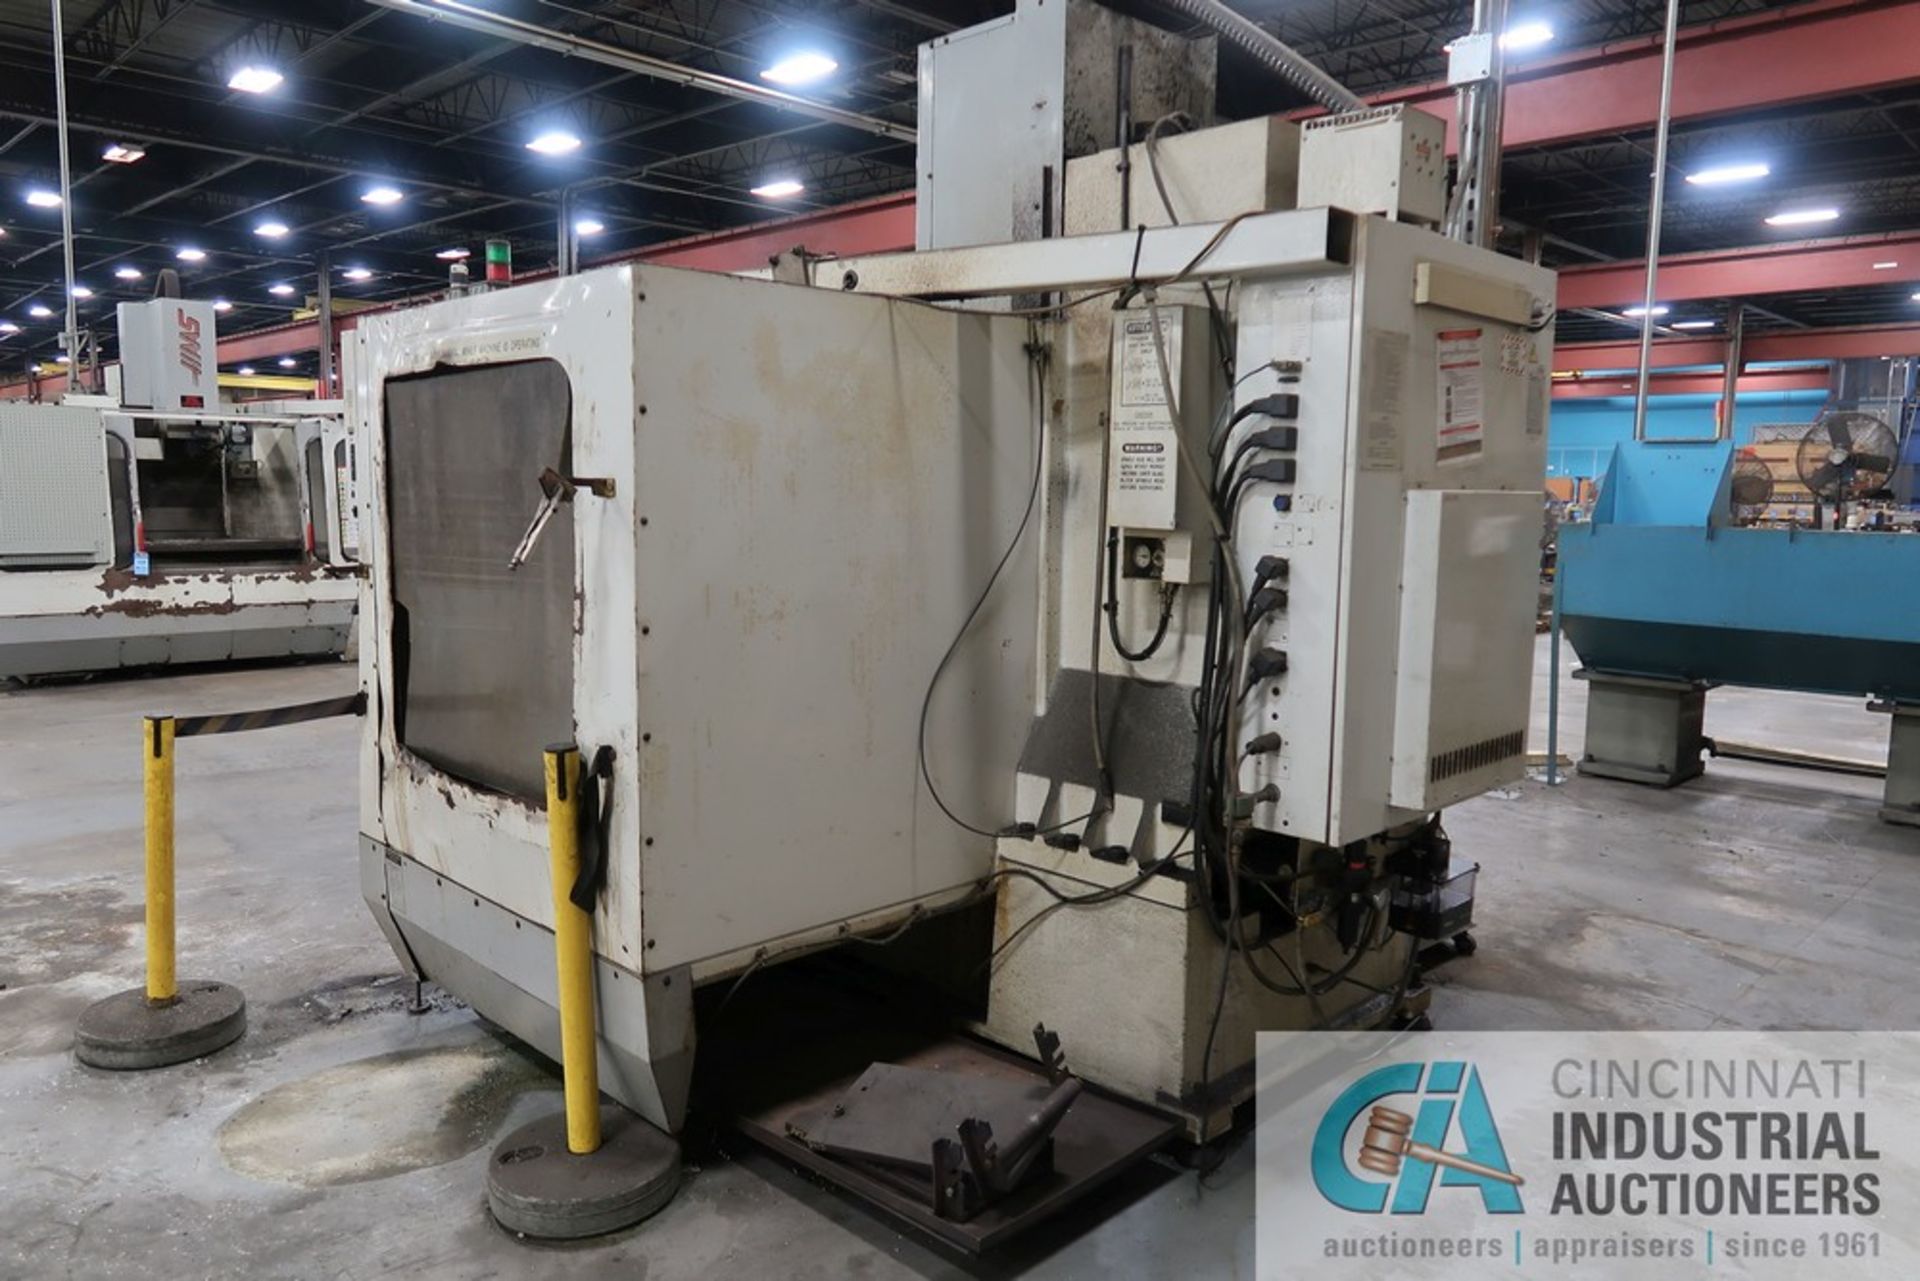 1998 HAAS MODEL VF-4 CNC VERTICAL MACHINING CENTER; S/N 15926 - Image 4 of 10